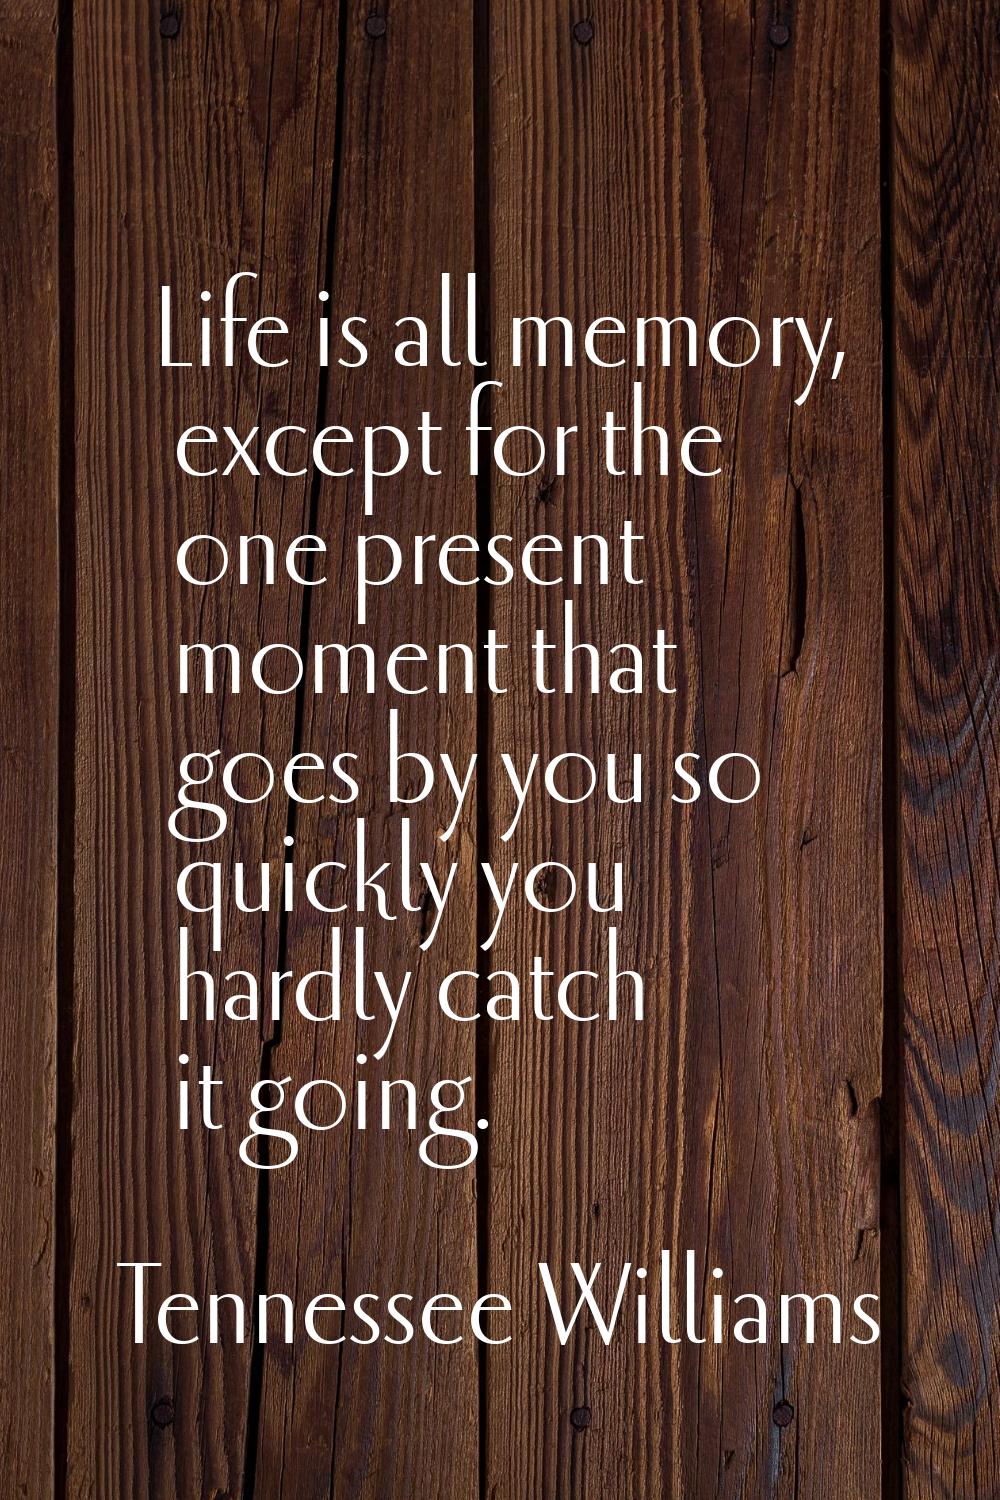 Life is all memory, except for the one present moment that goes by you so quickly you hardly catch 